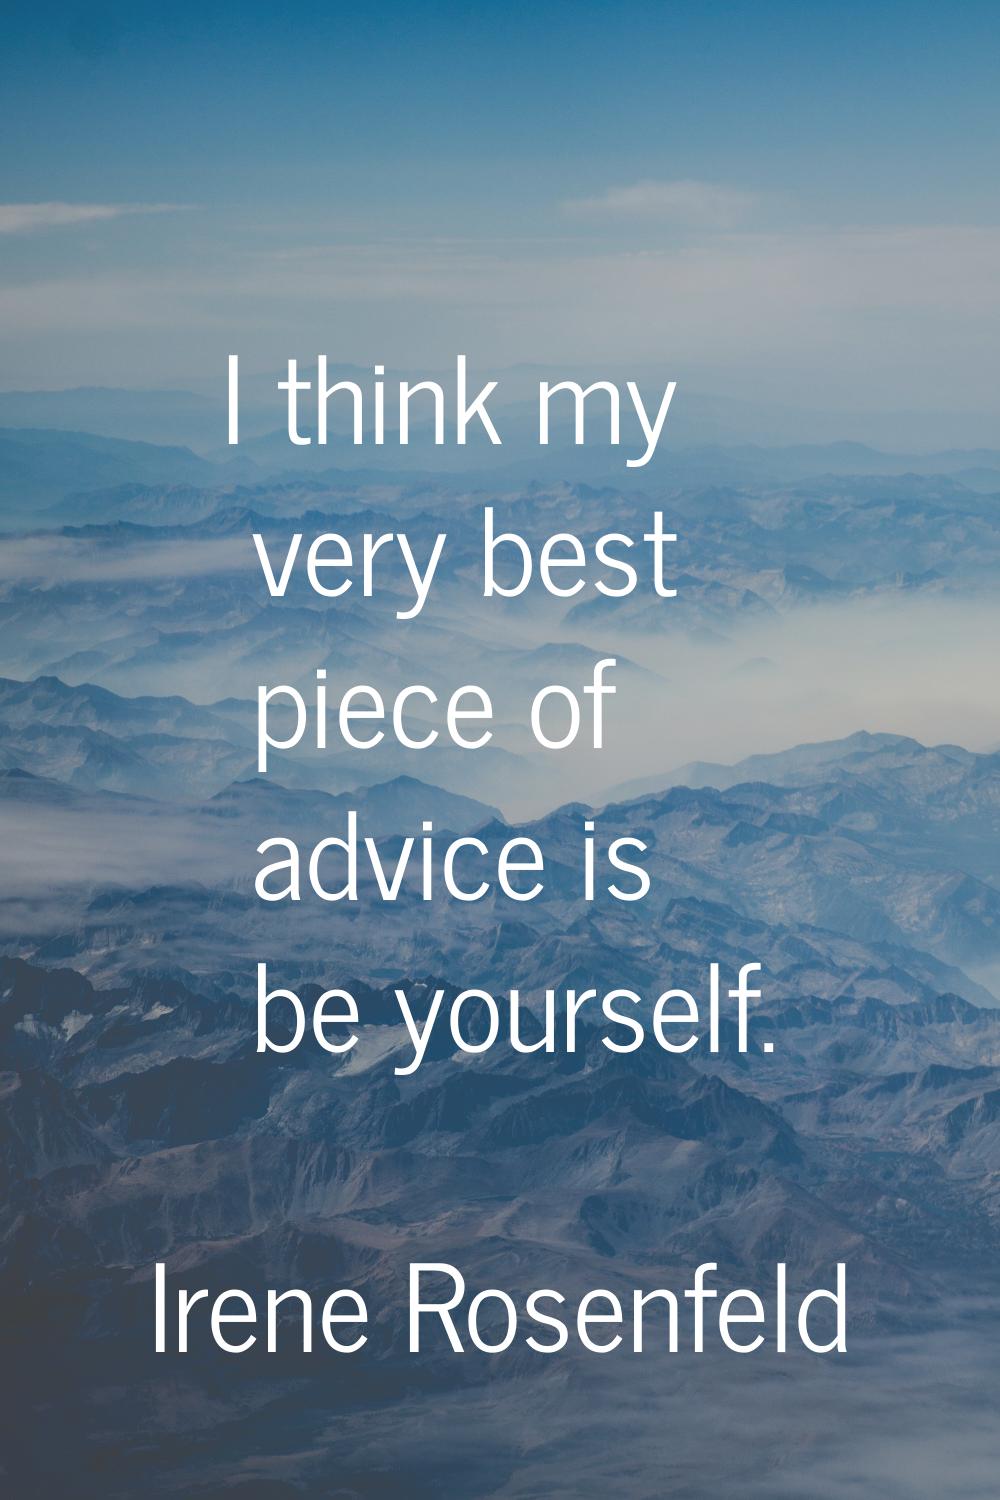 I think my very best piece of advice is be yourself.